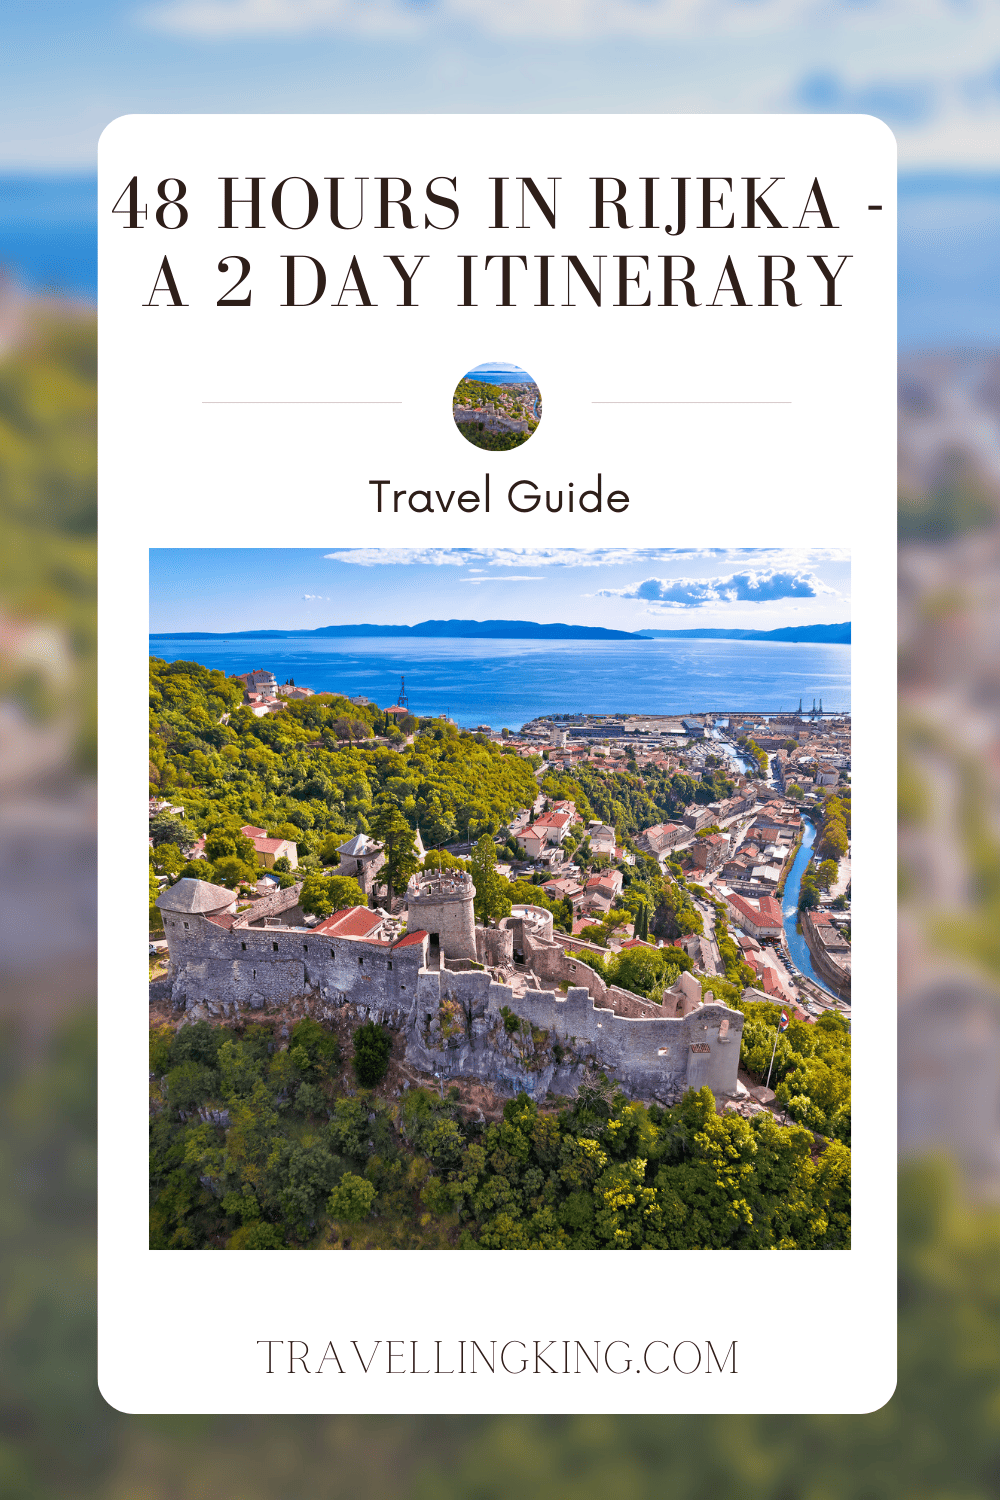 48 hours in Rijeka - A 2 day Itinerary